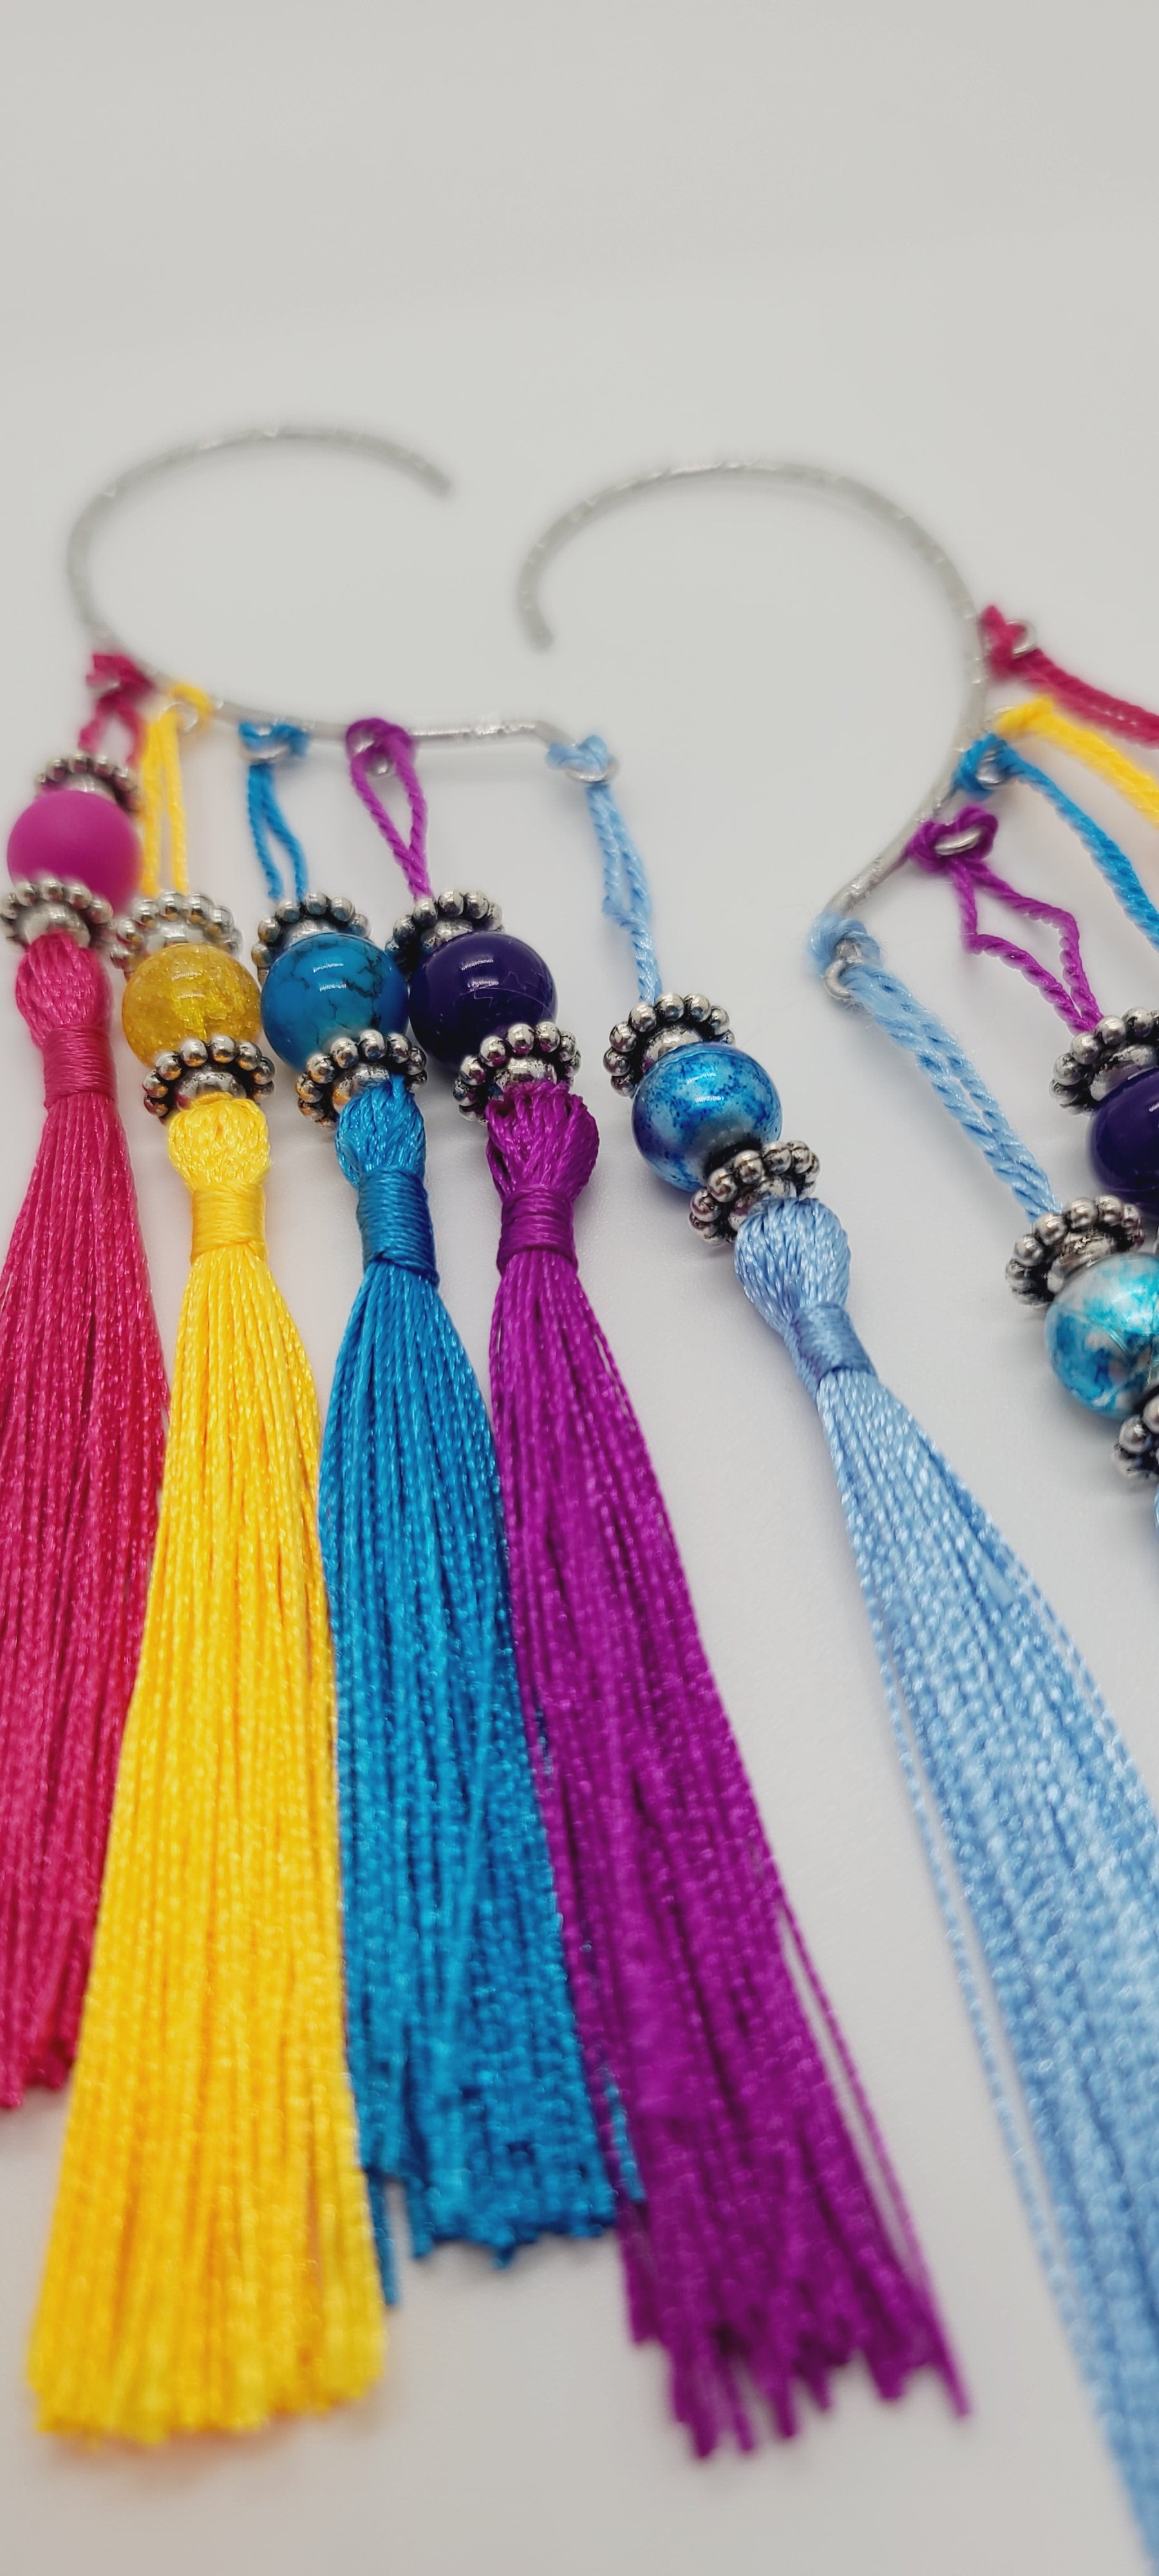 Length: 8 inches | Weight: 1.6 ounces  Distinctly You! These silver cuff earrings are made with colorful tassels, matching beads, and silver rondelles.